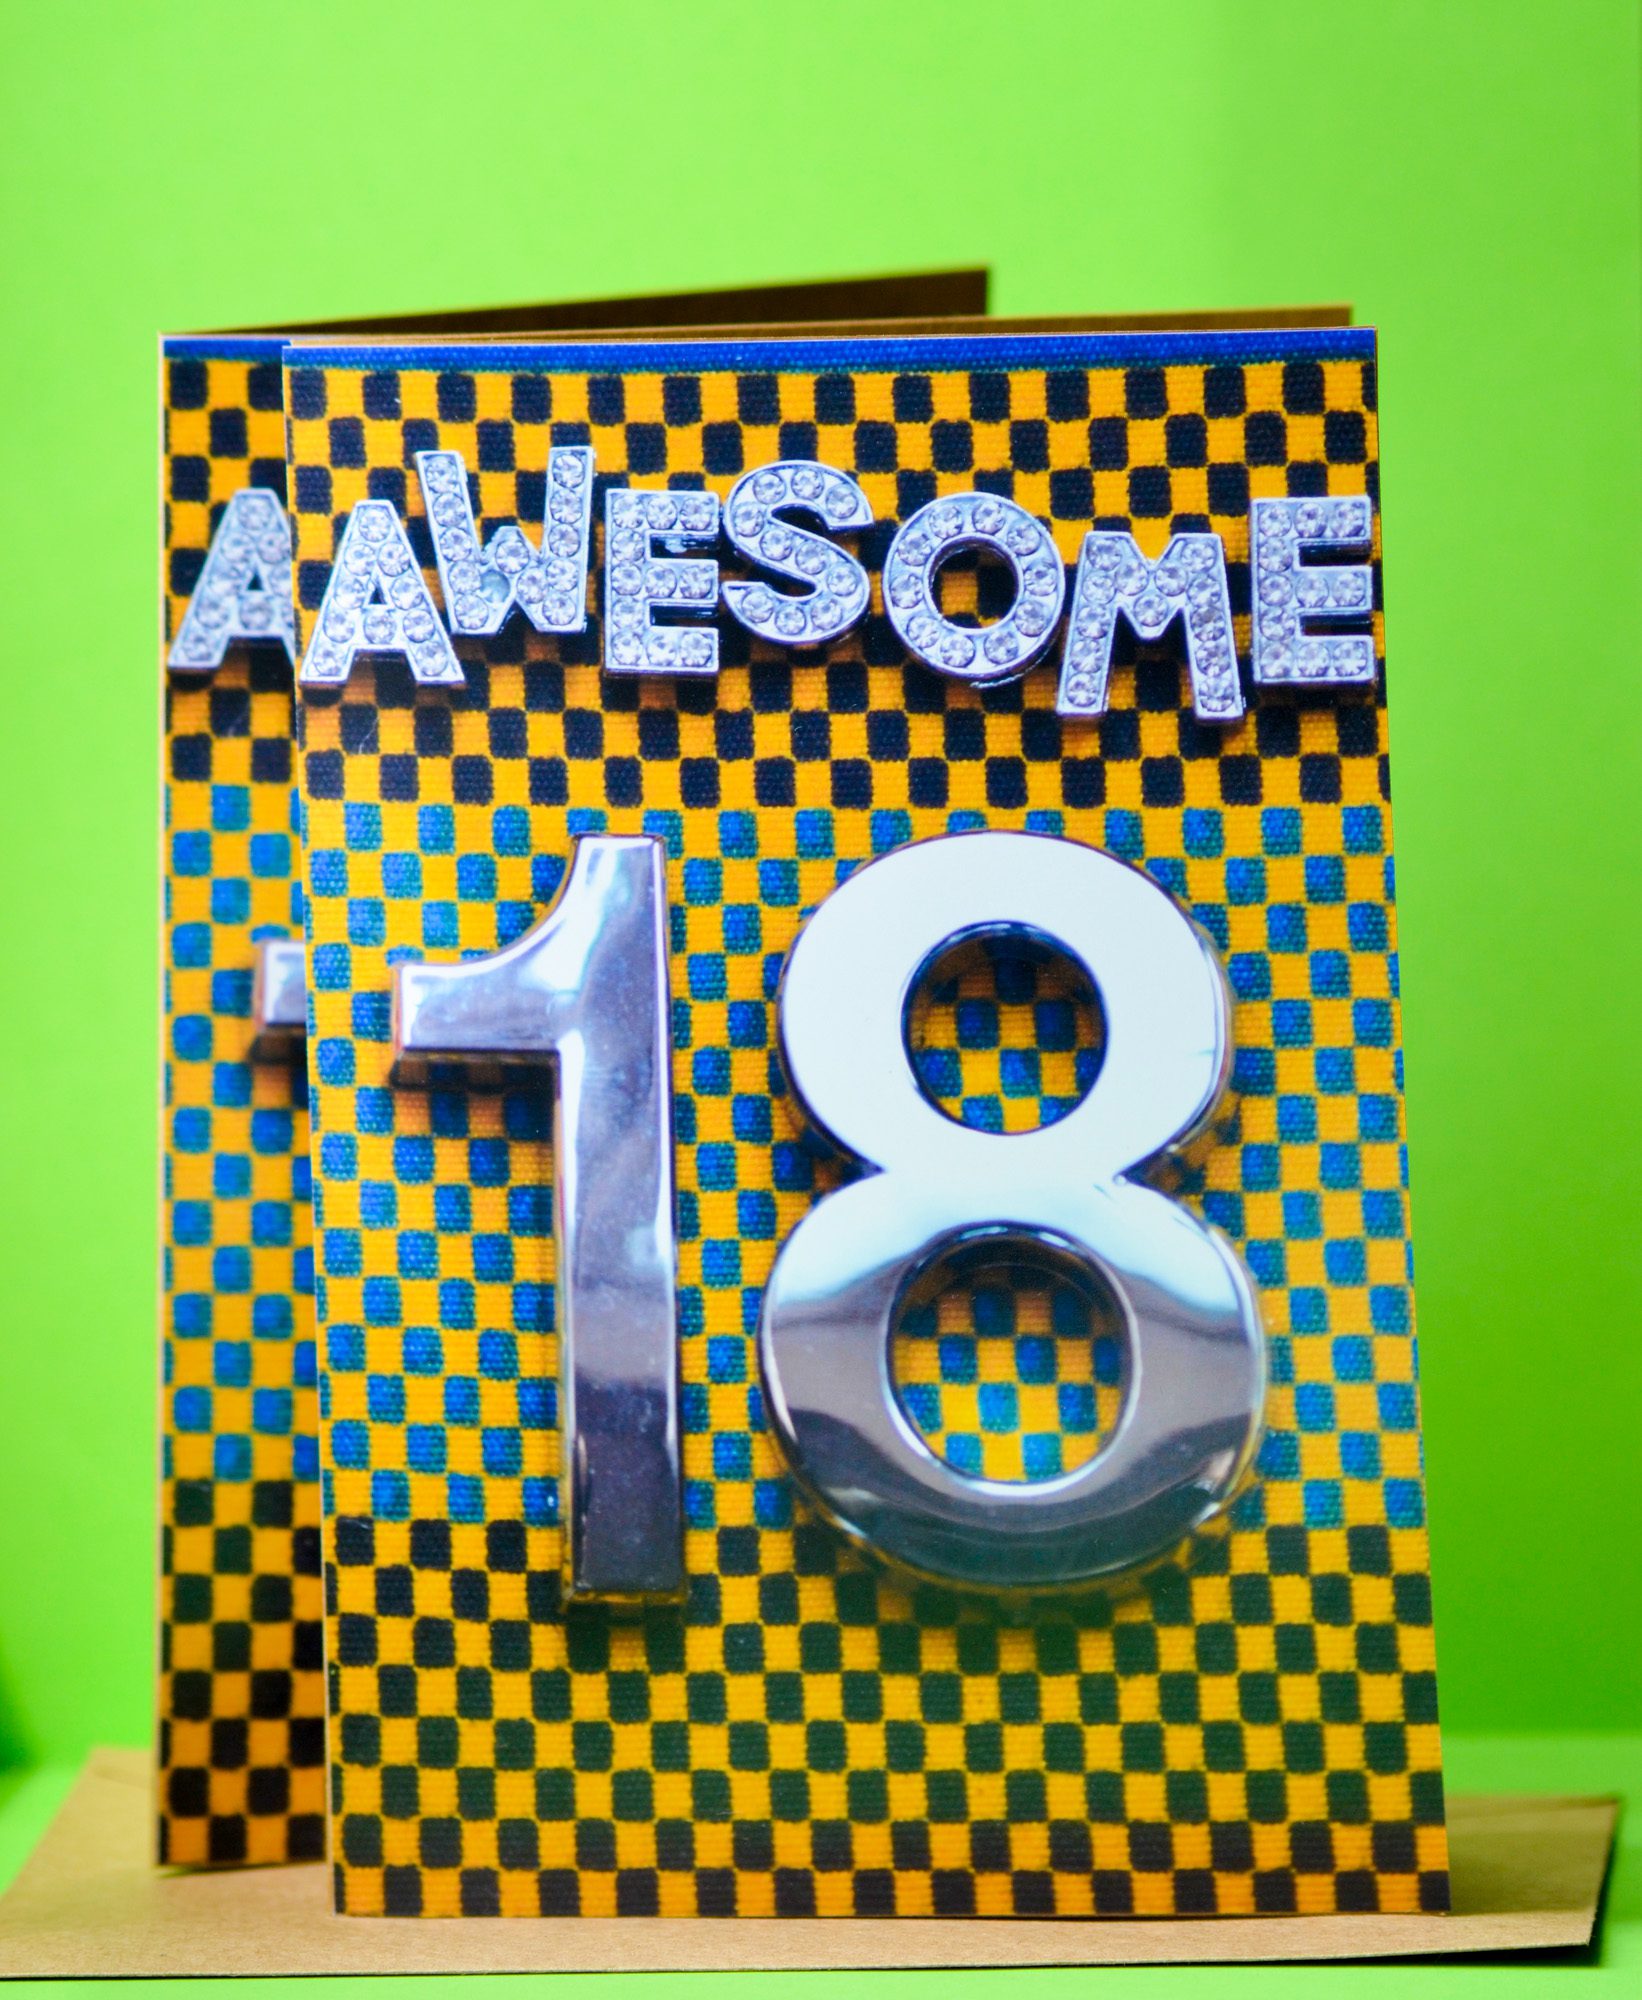 The Awesome 18th Birthday card